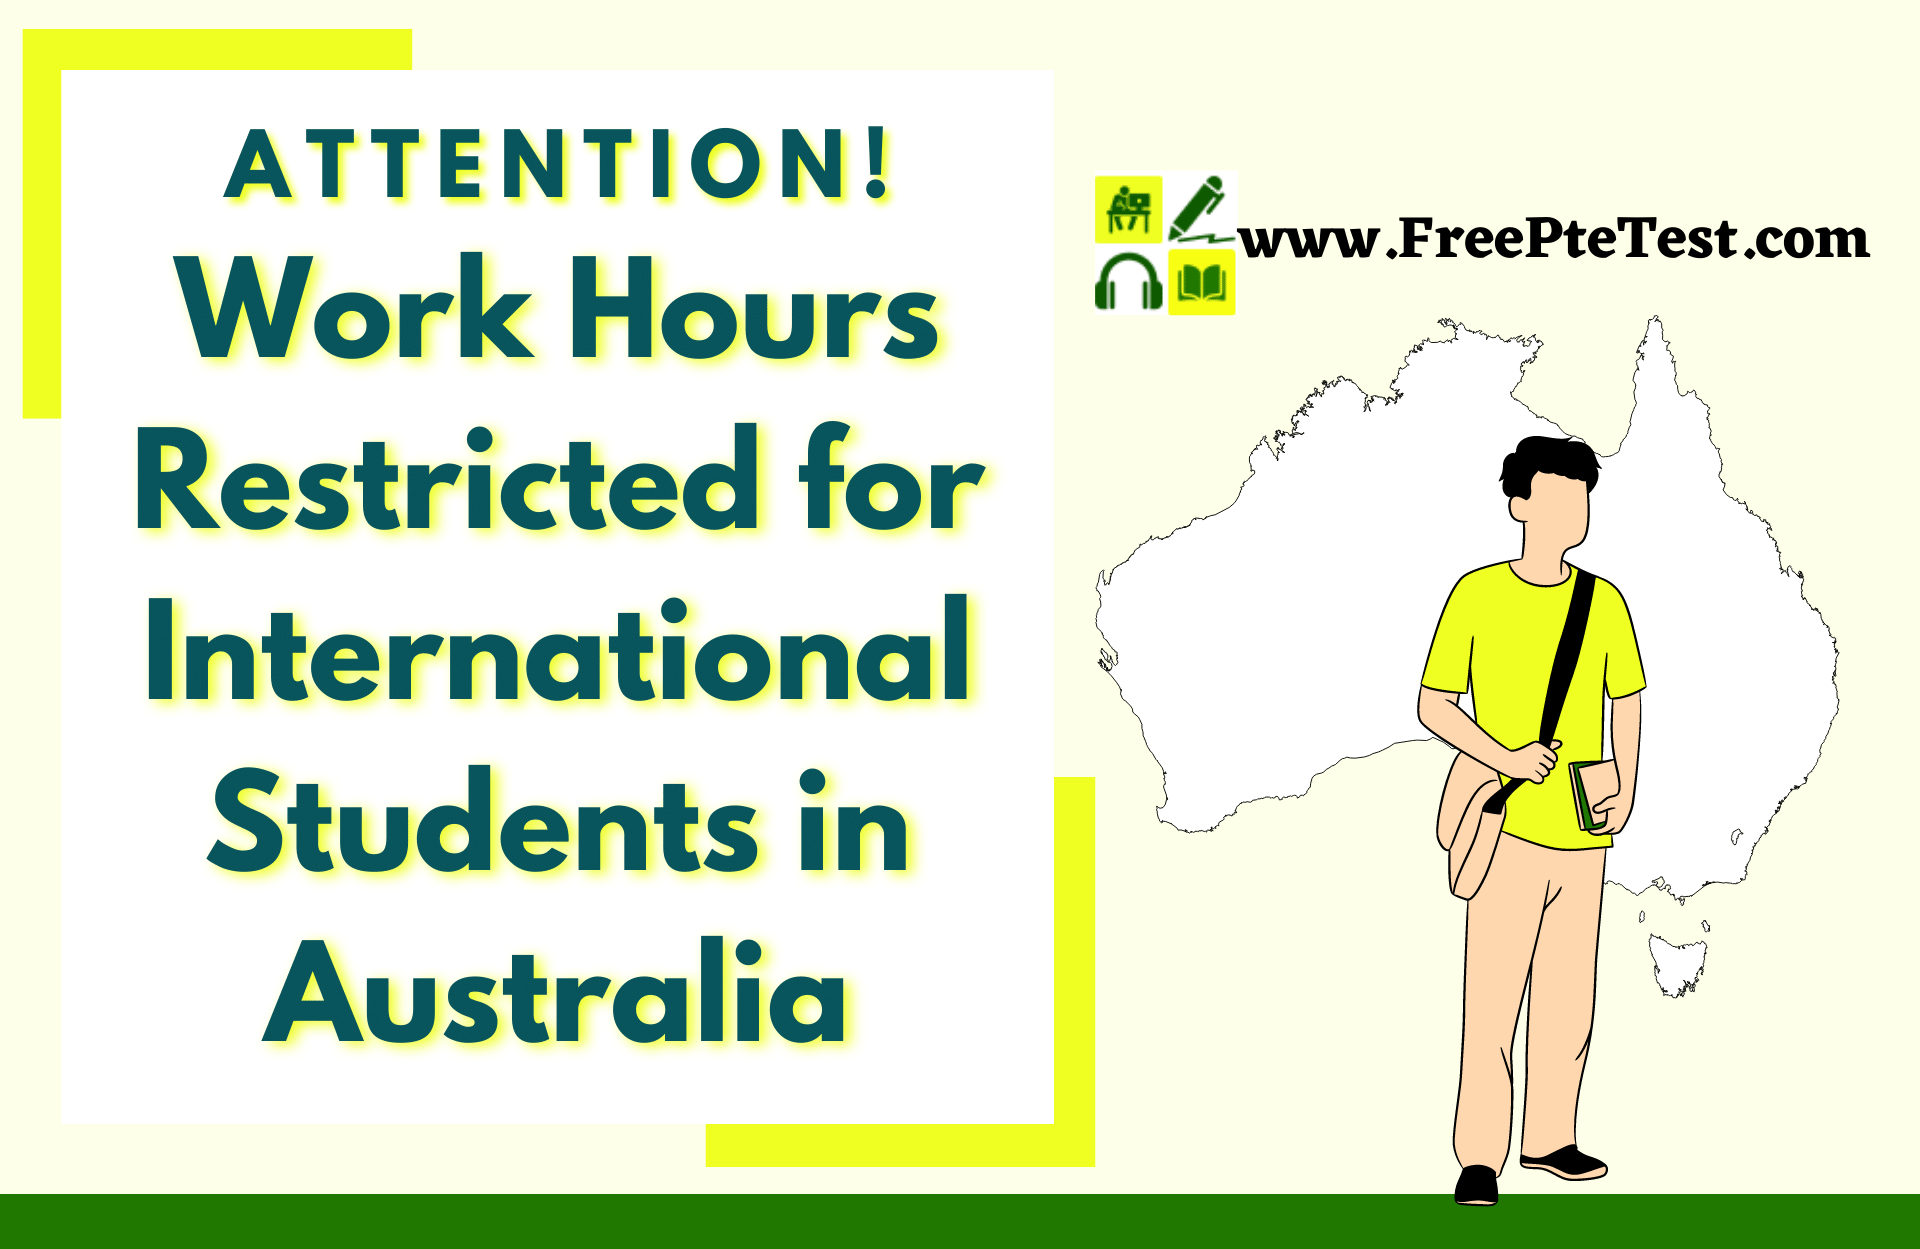 You are currently viewing Attention! Work Hours Restricted for International Students in Australia